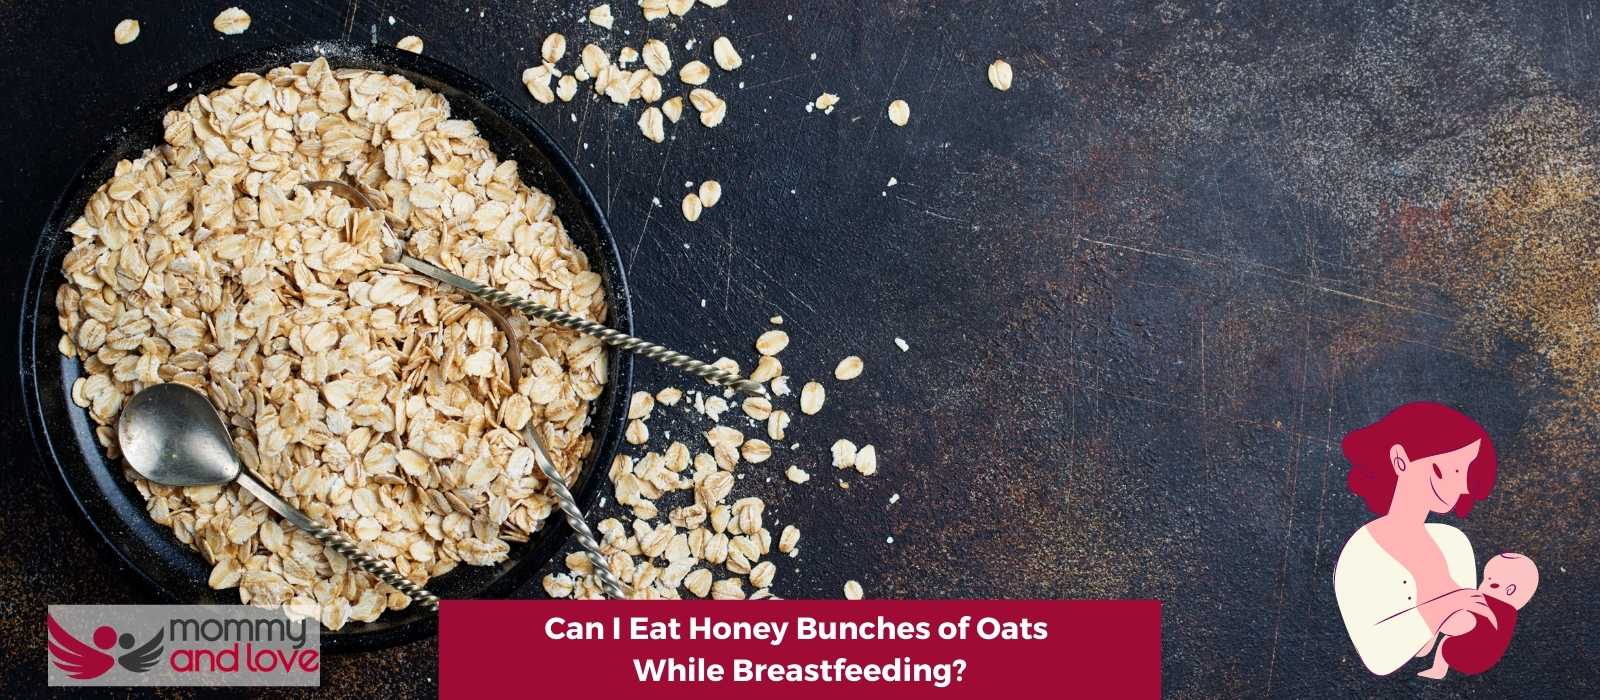 Can I Eat Honey Bunches of Oats While Breastfeeding